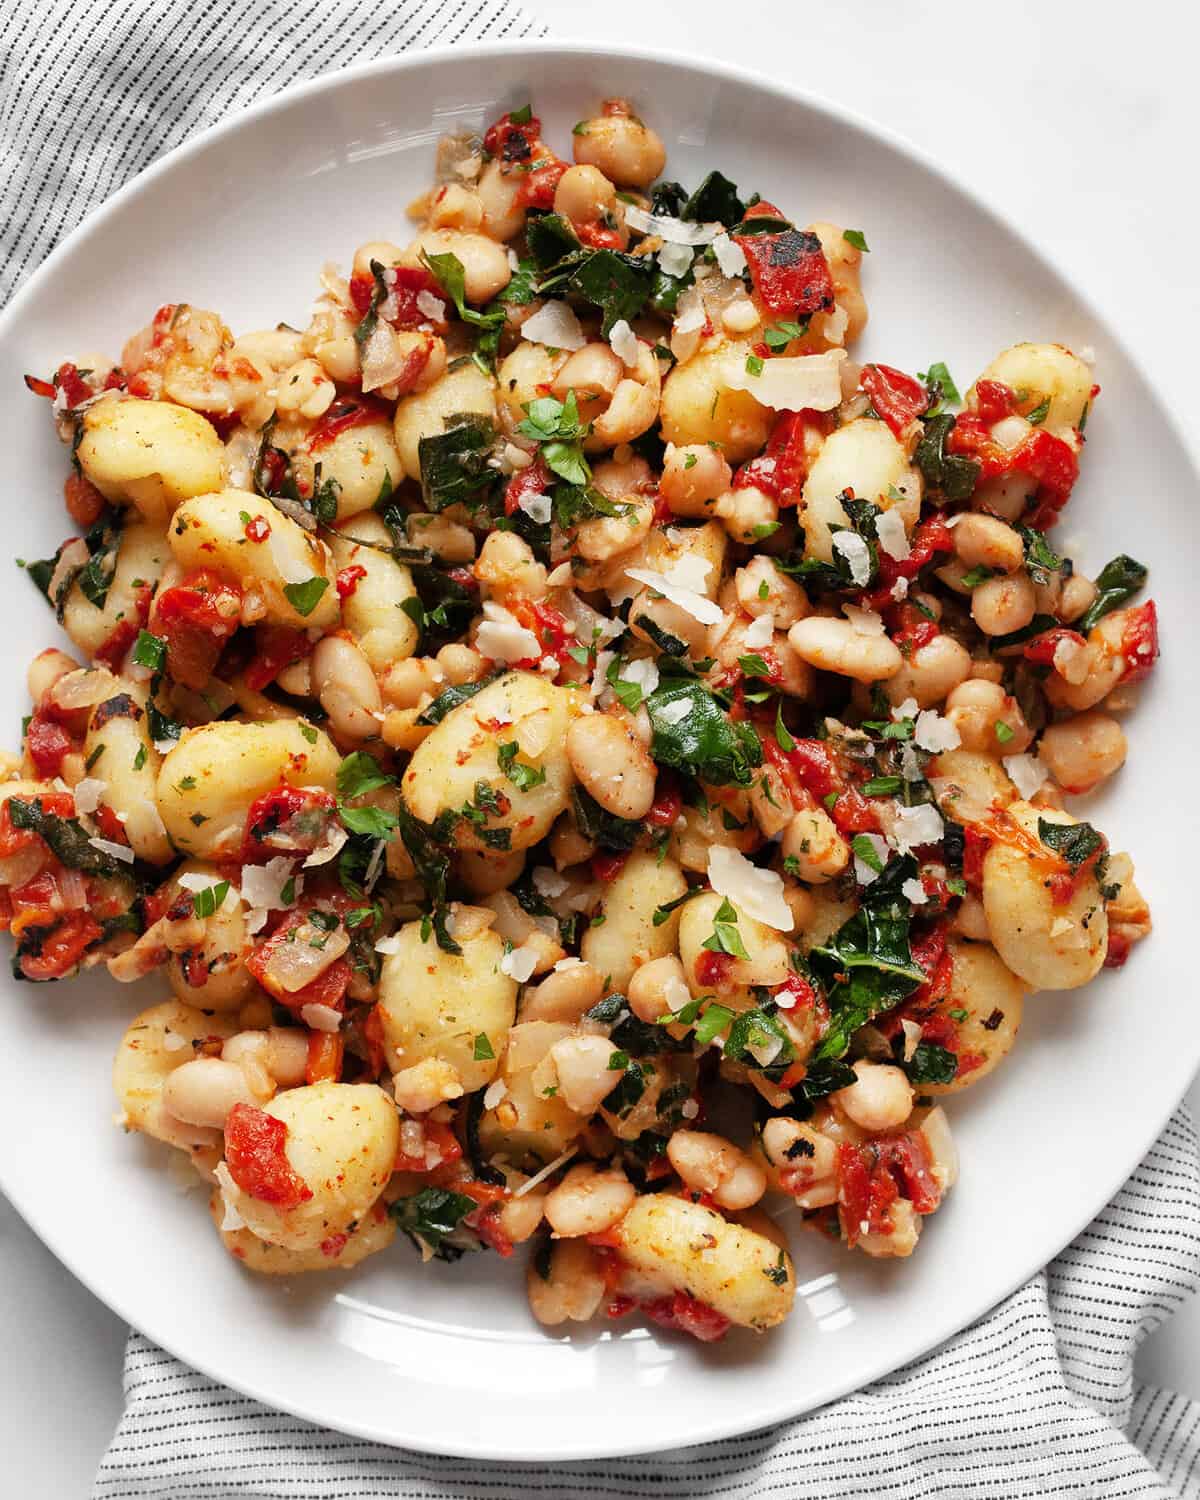 Skillet gnocchi with kale, roasted red peppers and white beans on a plate.